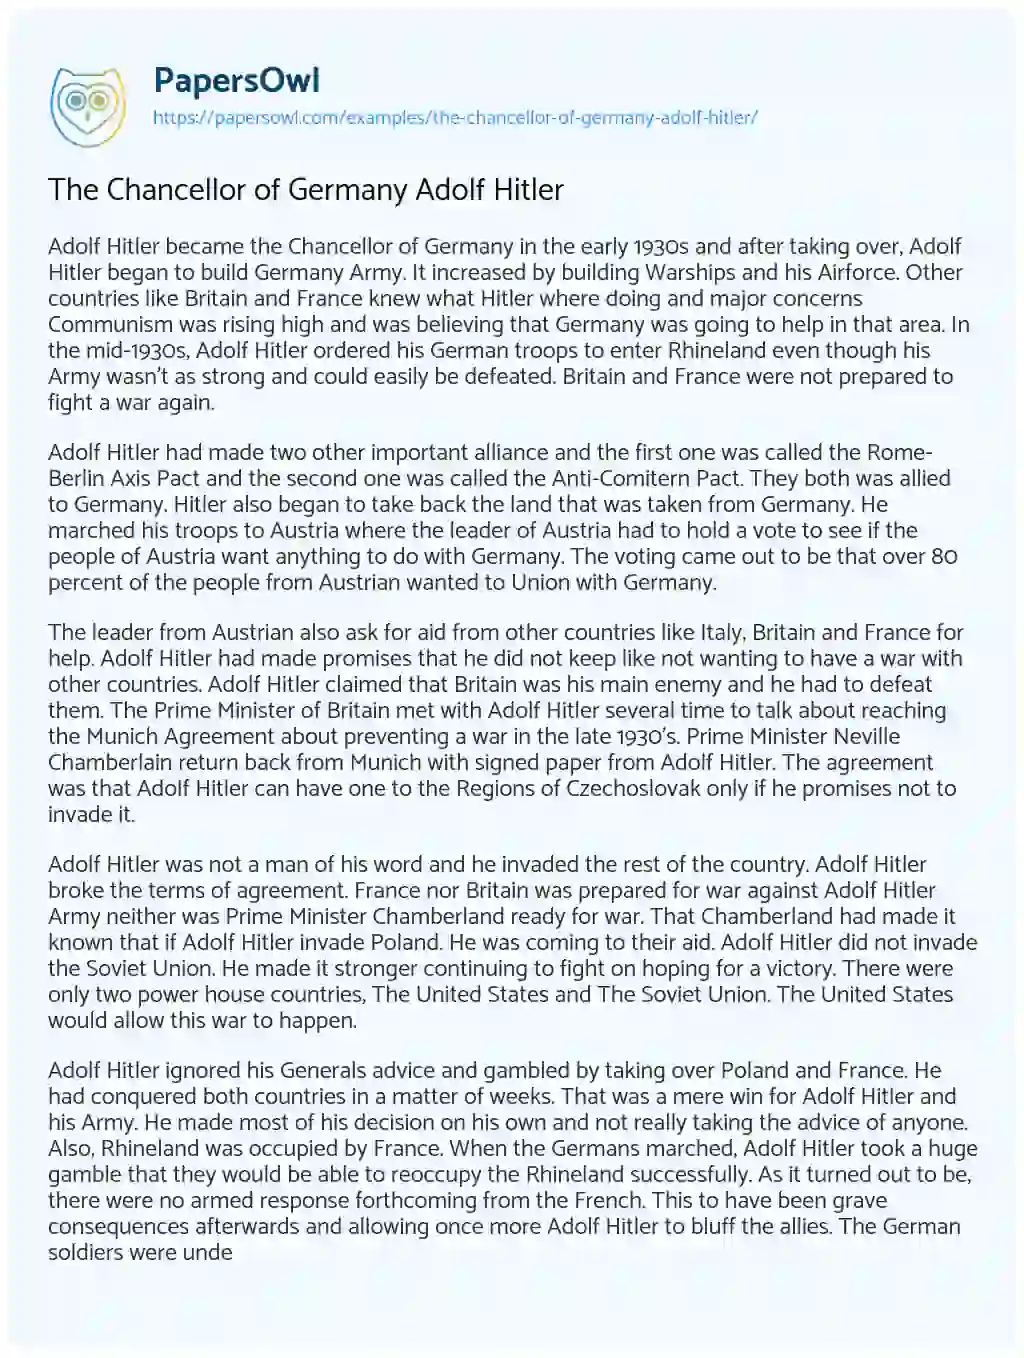 Essay on The Chancellor of Germany Adolf Hitler